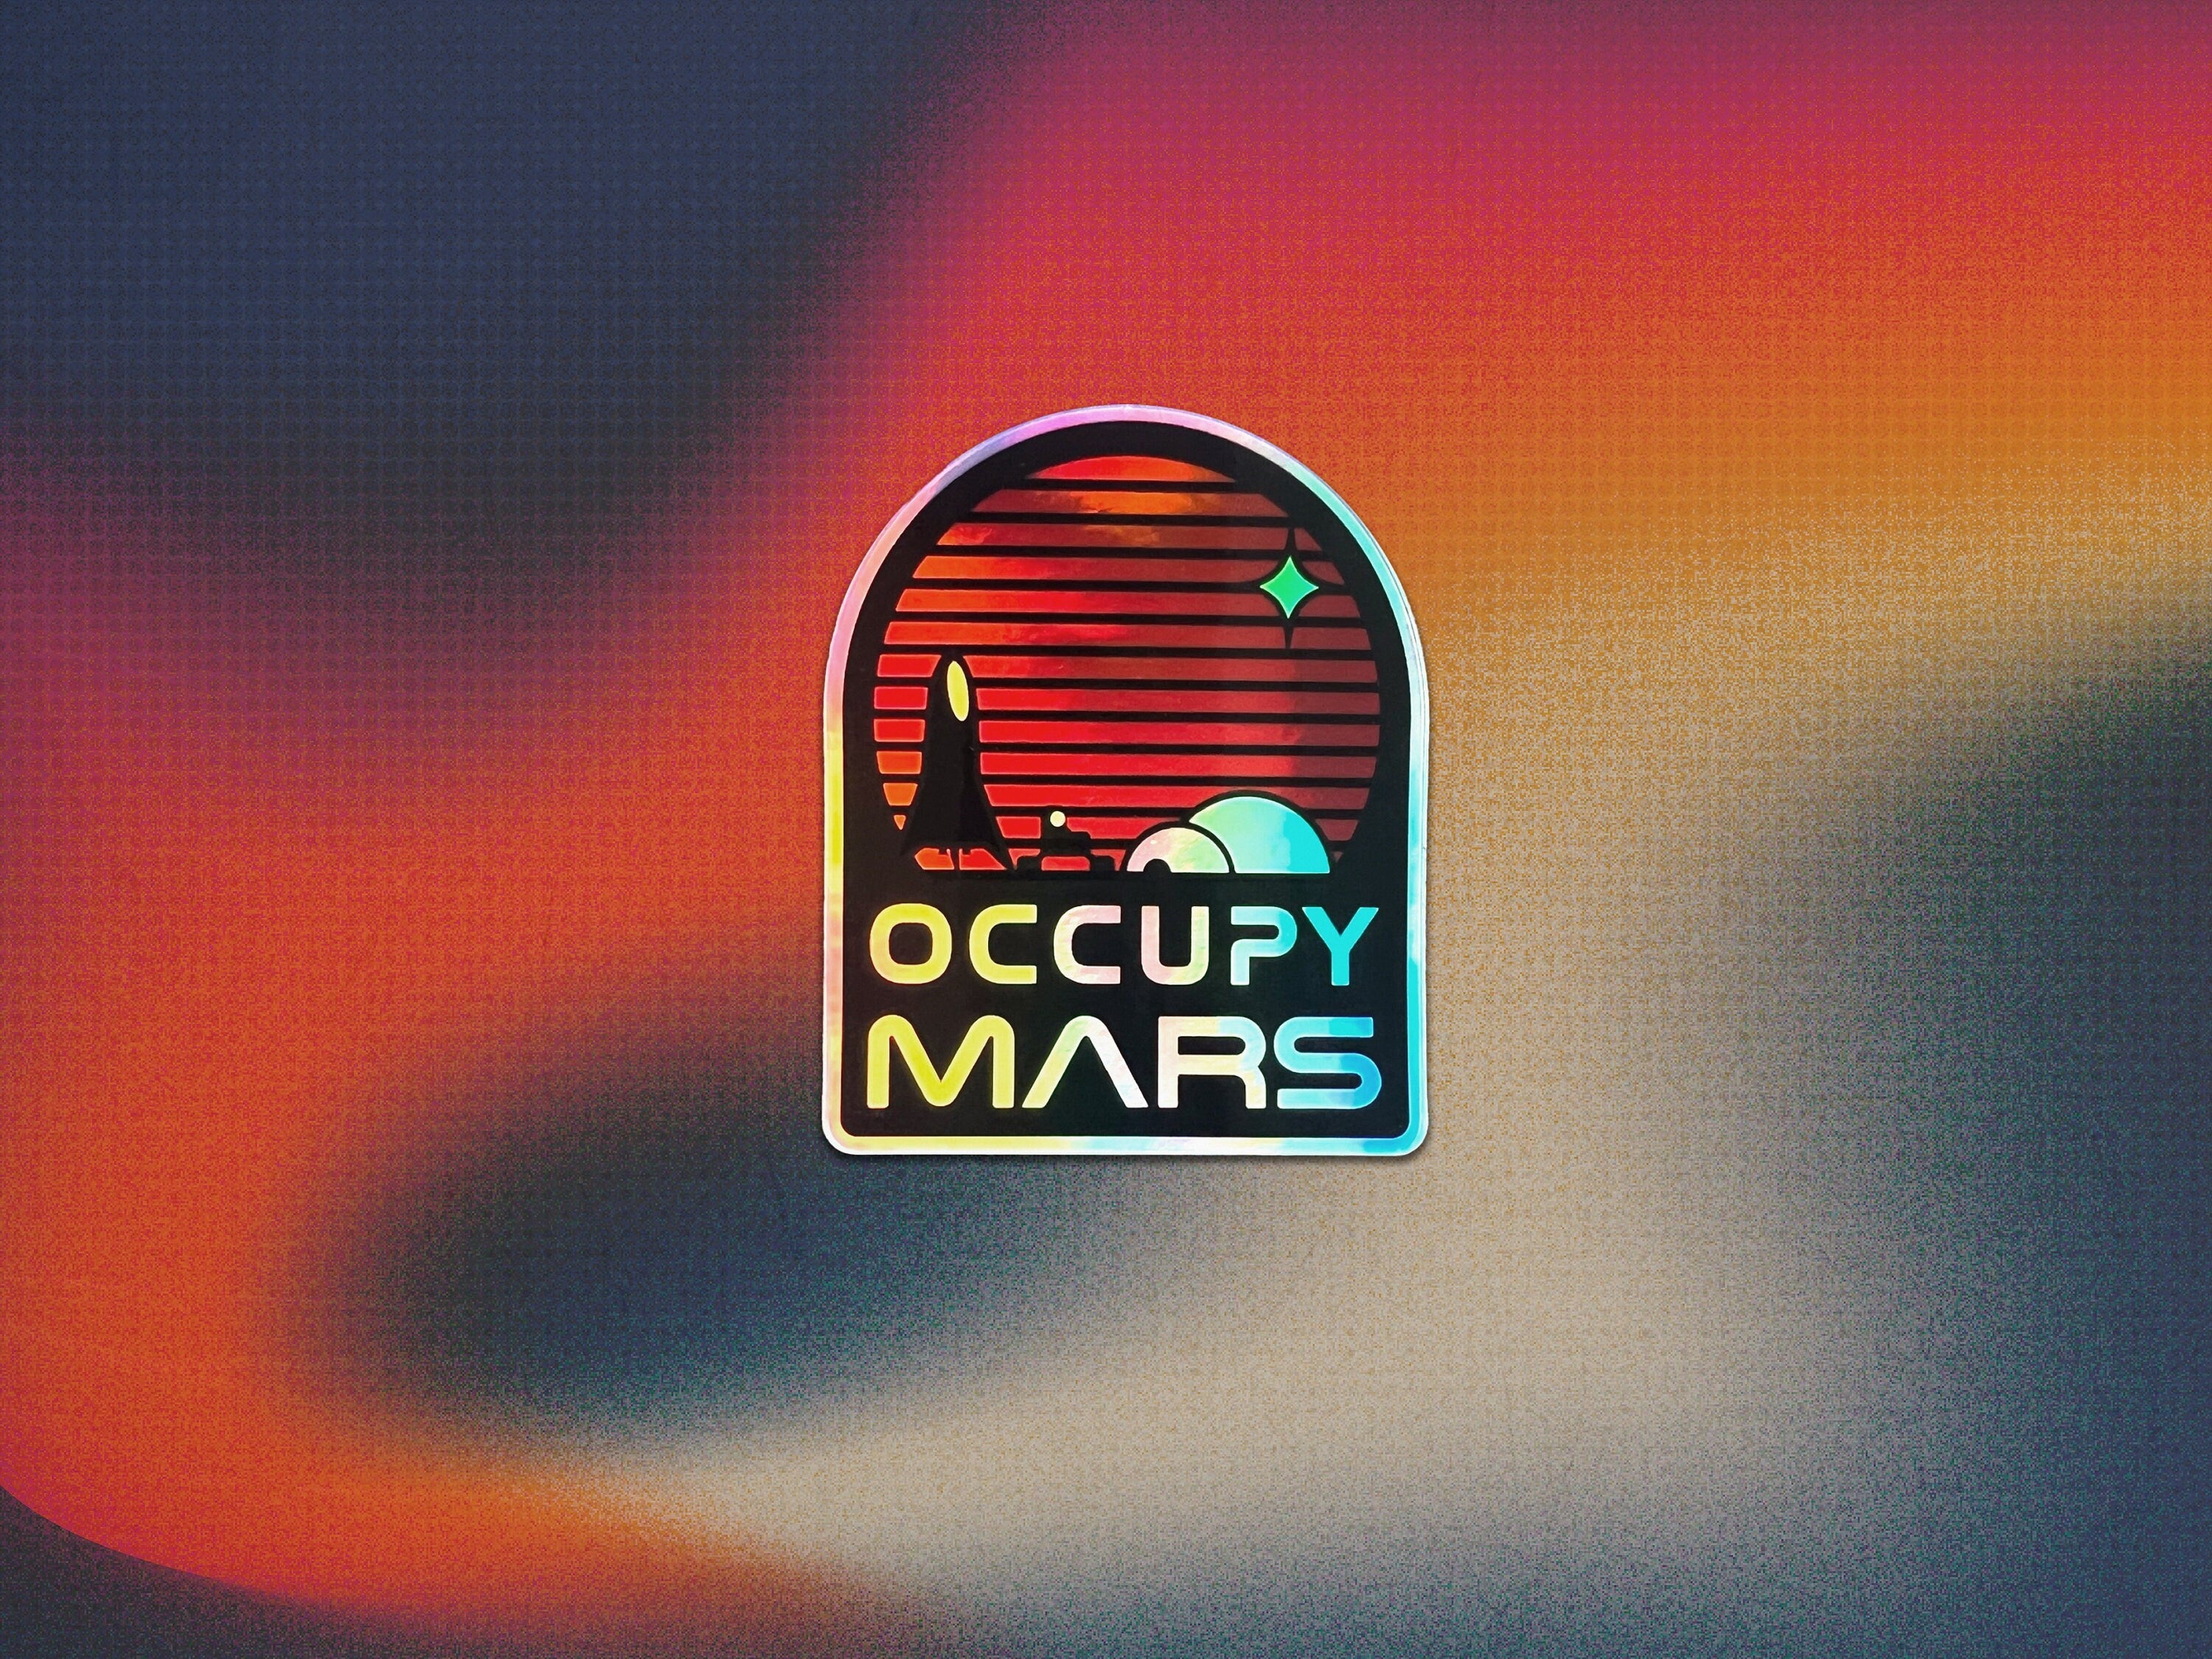 Occupy Mars Cyberpunk Holographic Vinyl Decal - Laptop / Waterbottle Sci-Fi Sticker - Martian Base Aerospace Gift by The Sciencey